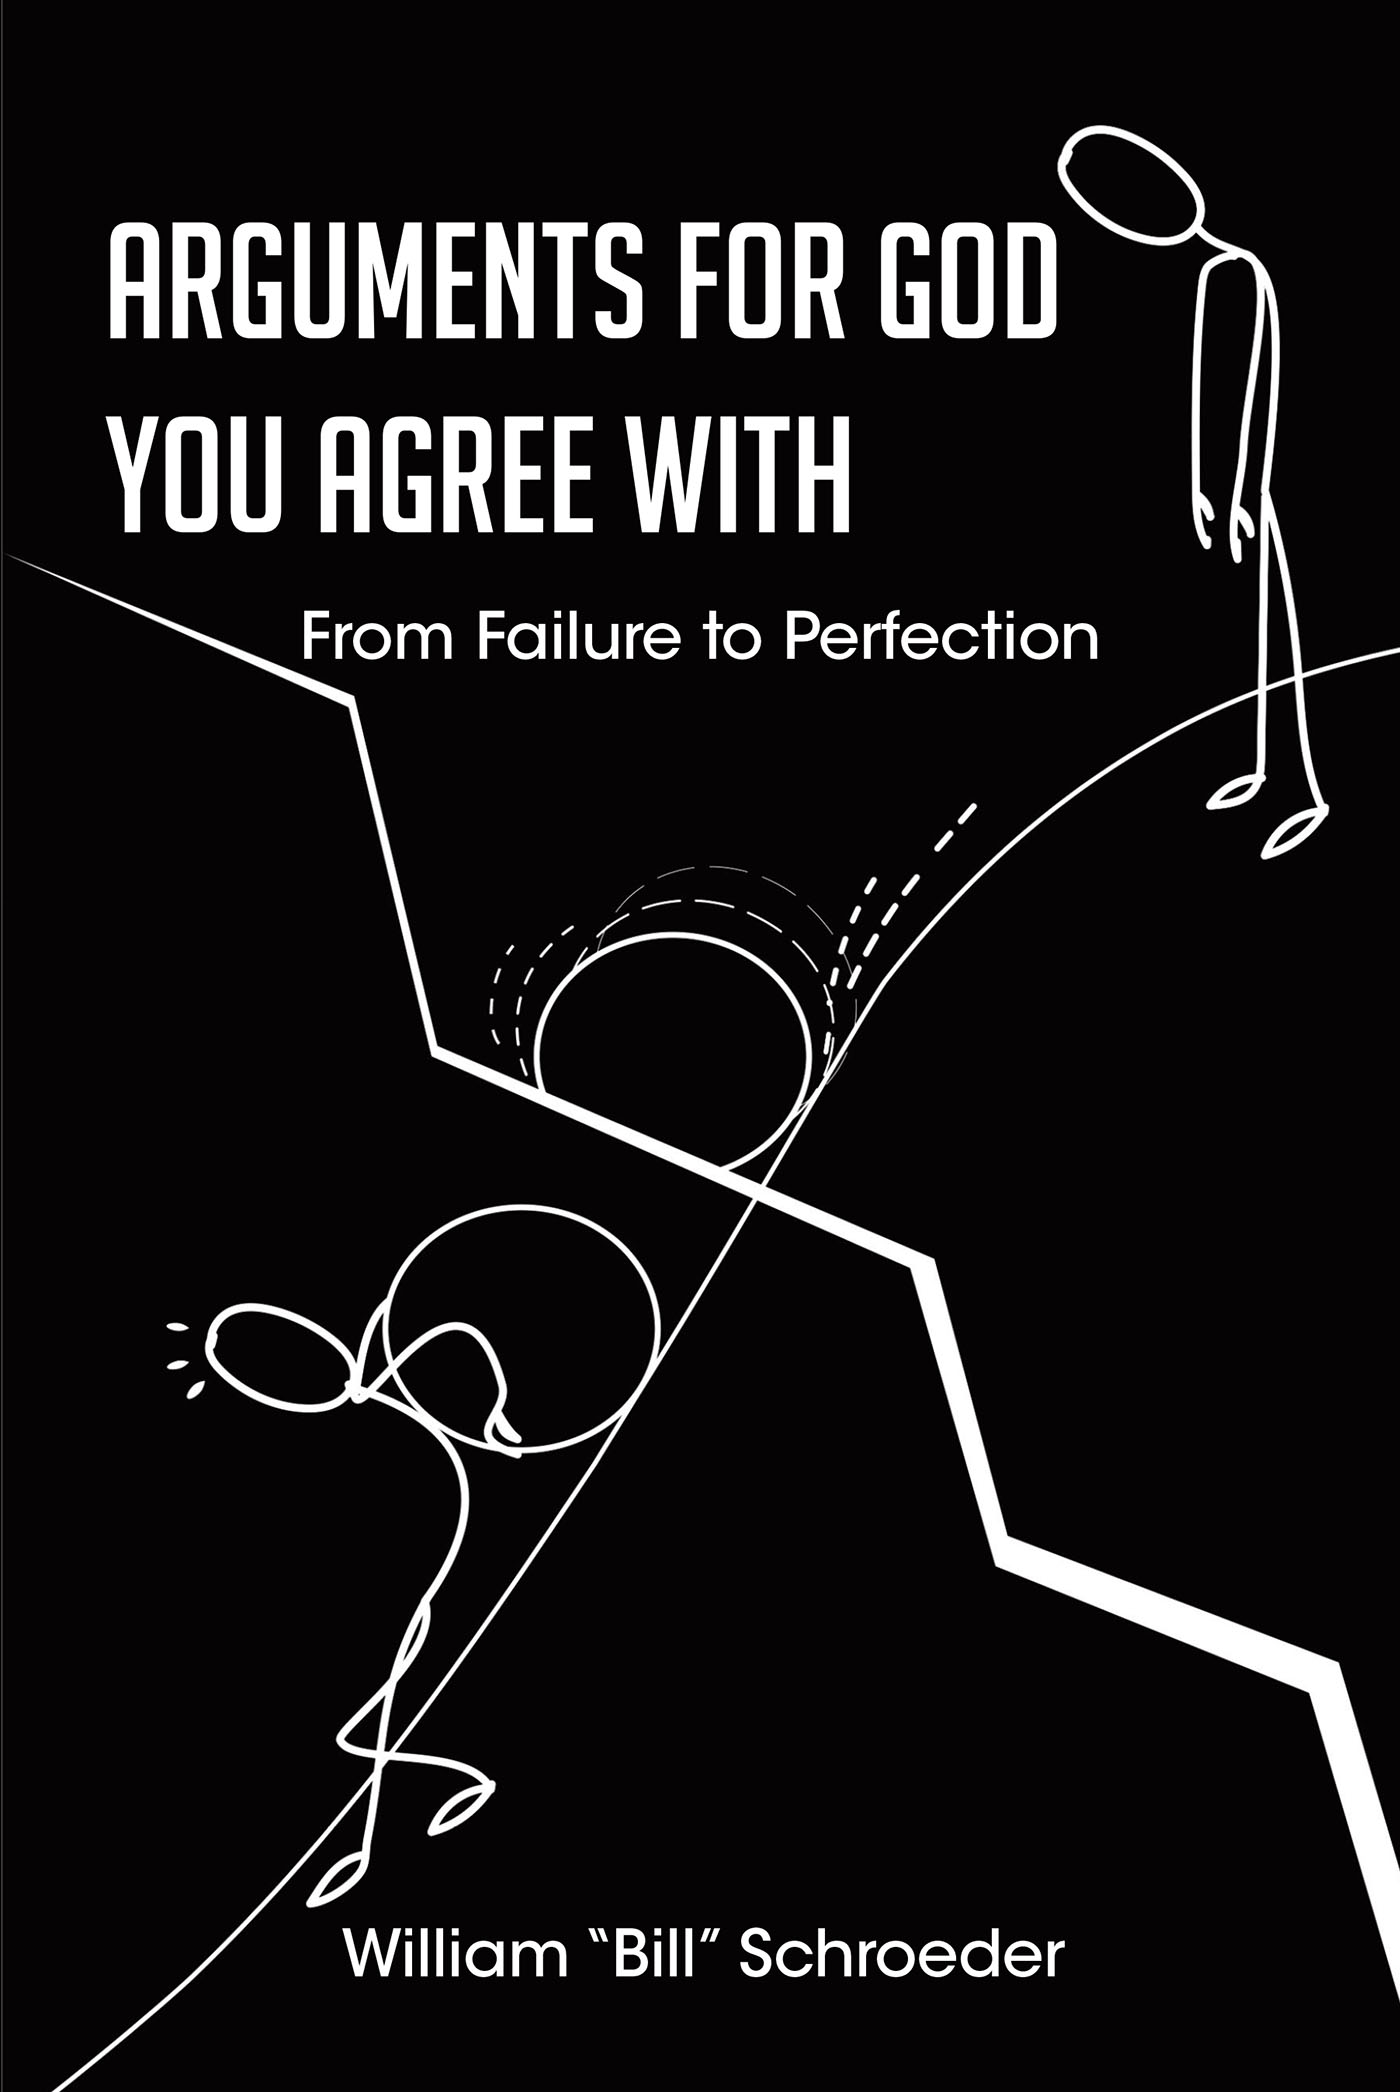 William “Bill” Schroeder’s Newly Released “ARGUMENTS FOR GOD YOU AGREE WITH: From Failure to Perfection” is an Honest Challenge for All to Consider God